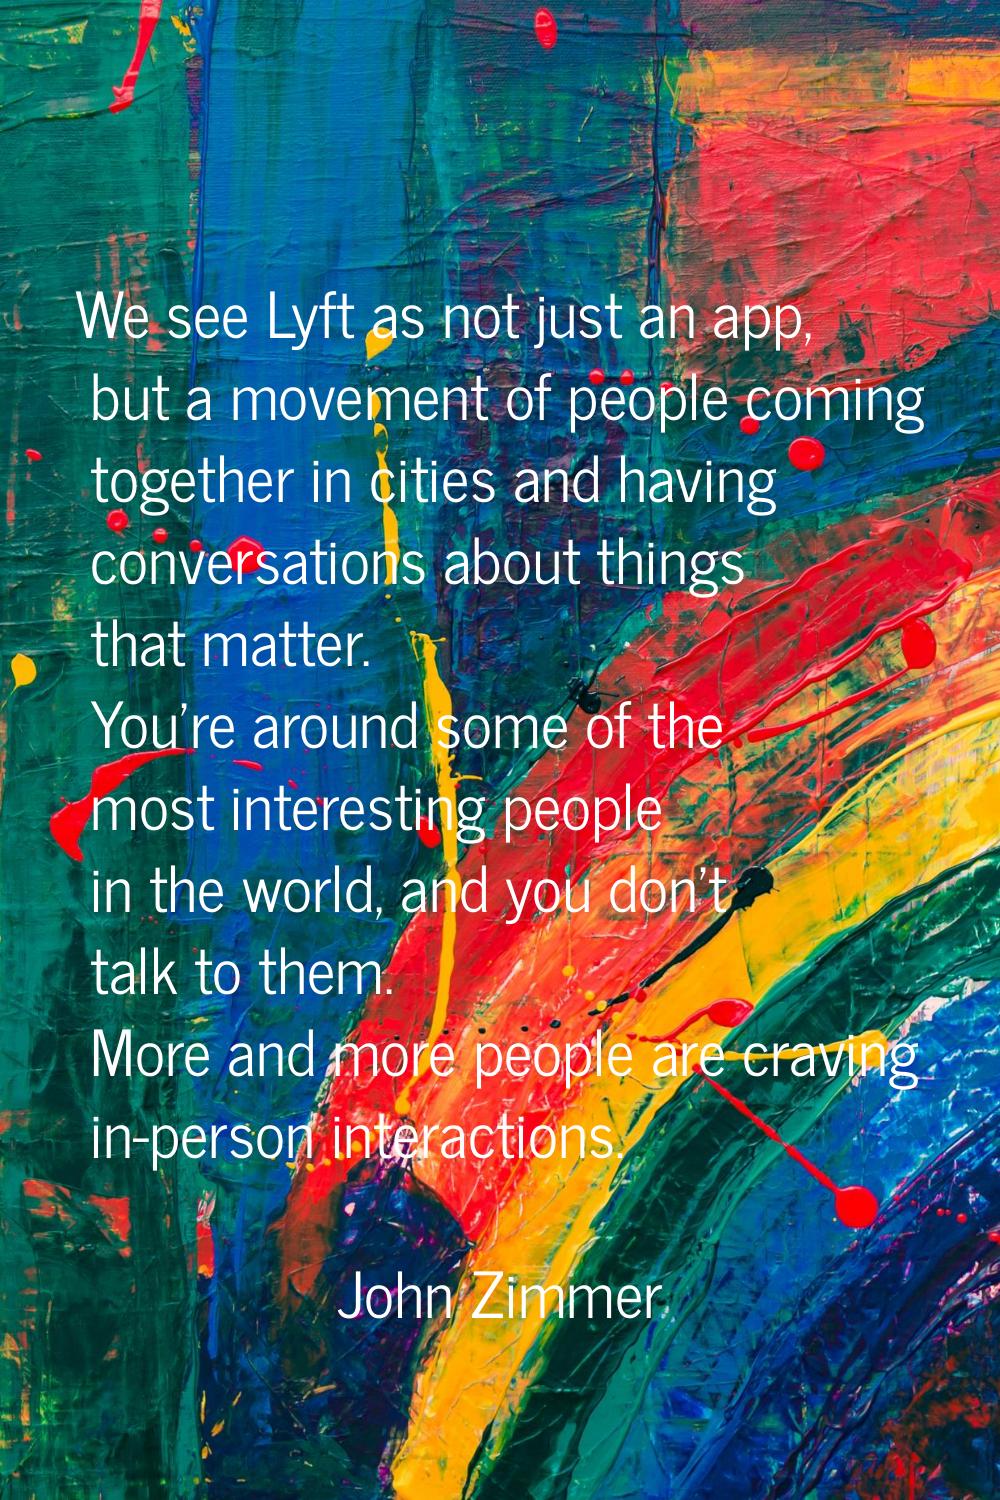 We see Lyft as not just an app, but a movement of people coming together in cities and having conve